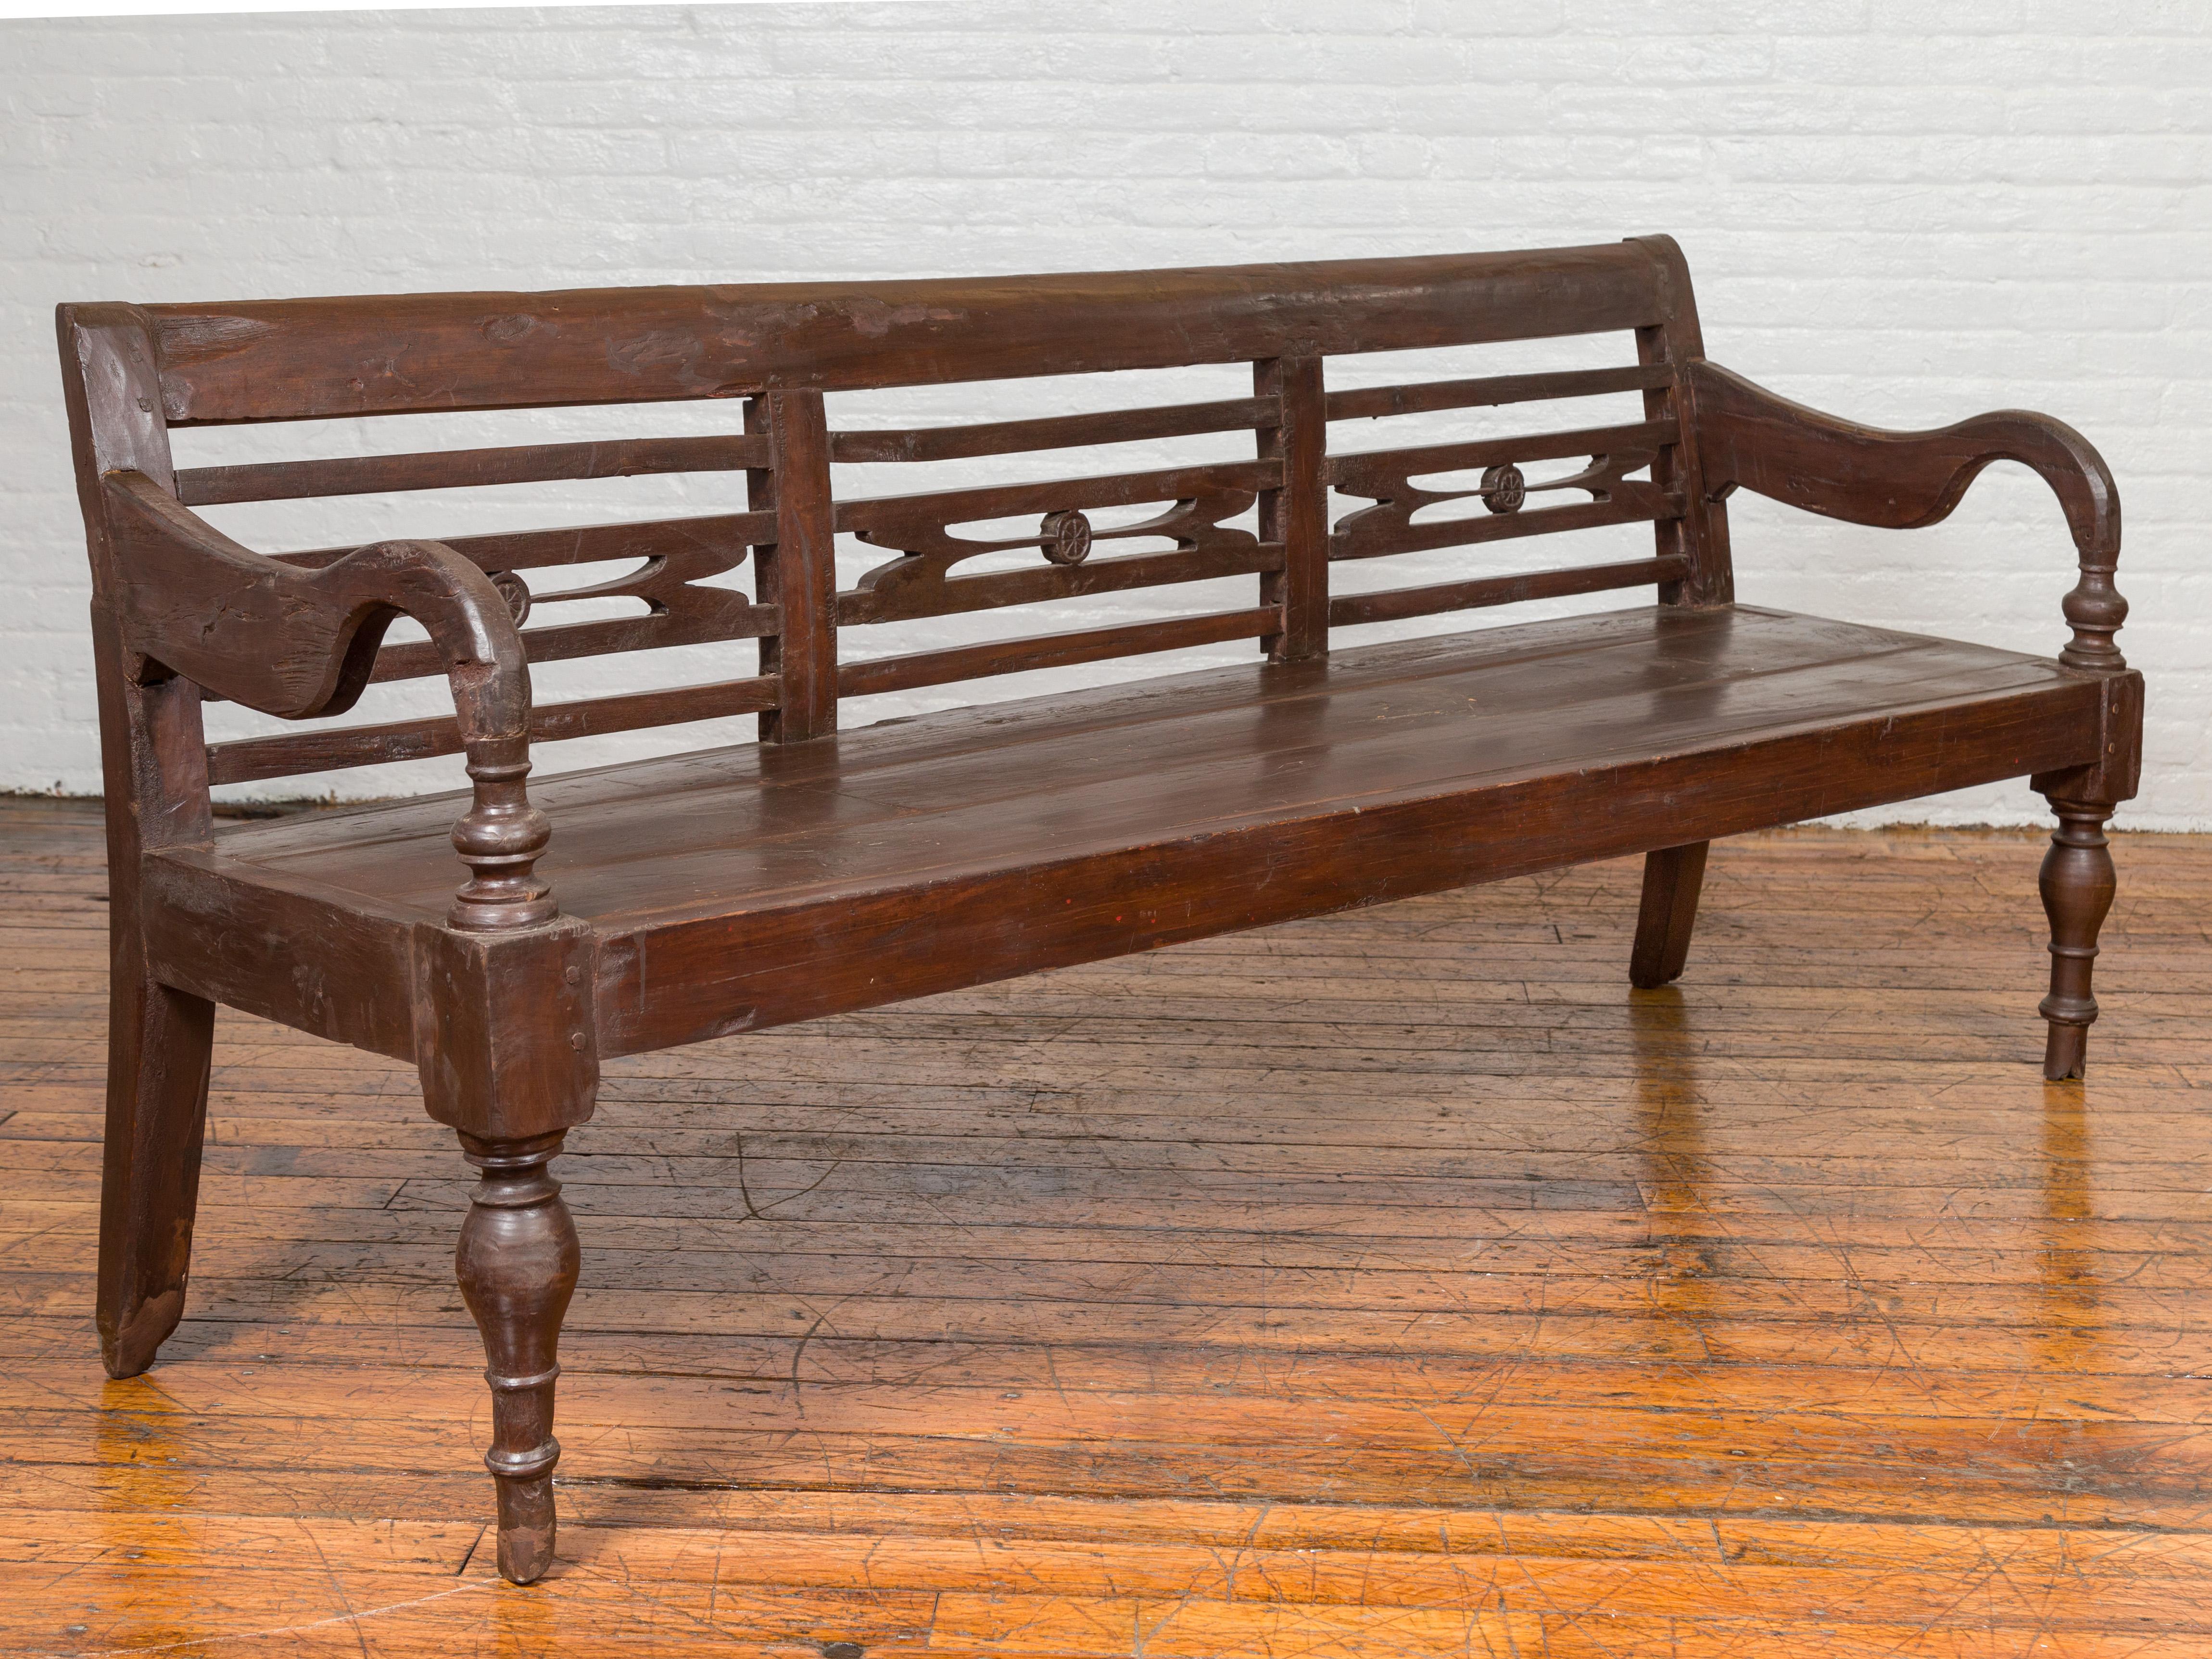 Dutch Colonial 19th Century Teak Bench with Pierced Back and Scrolling Arms 3